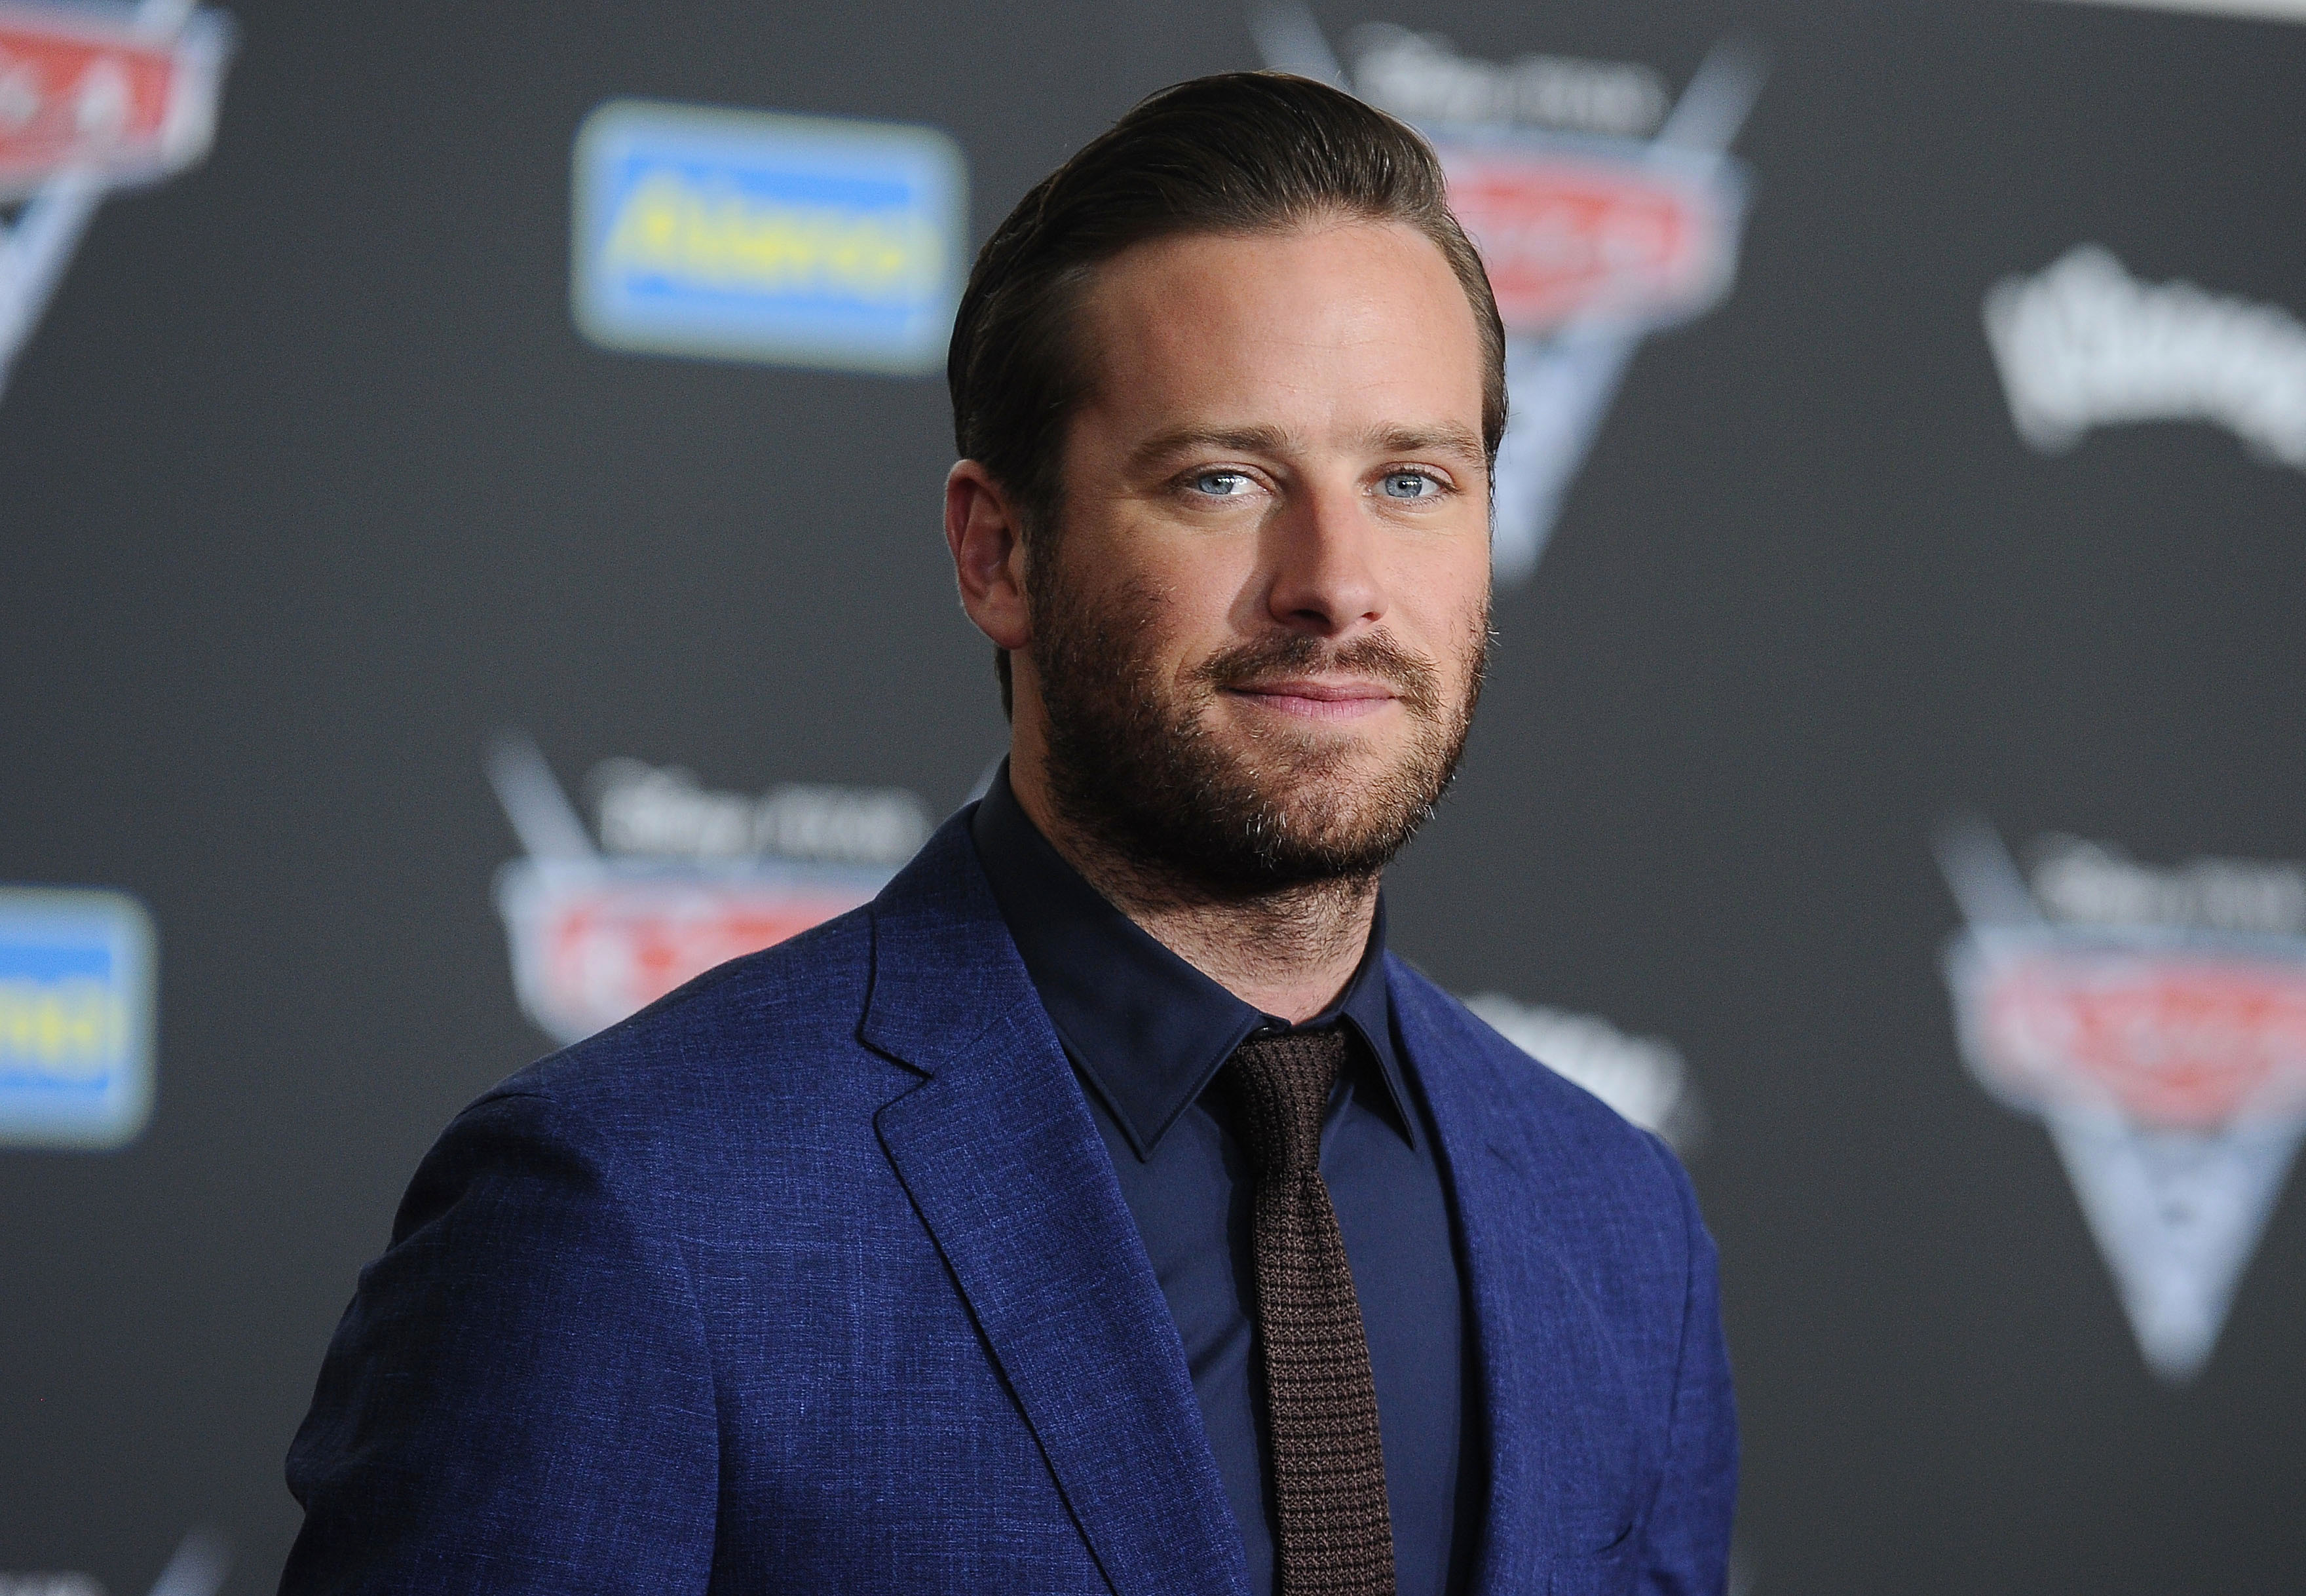 Armie Hammer ‘leaves upcoming The Godfather series’ amid leaked DM scandal